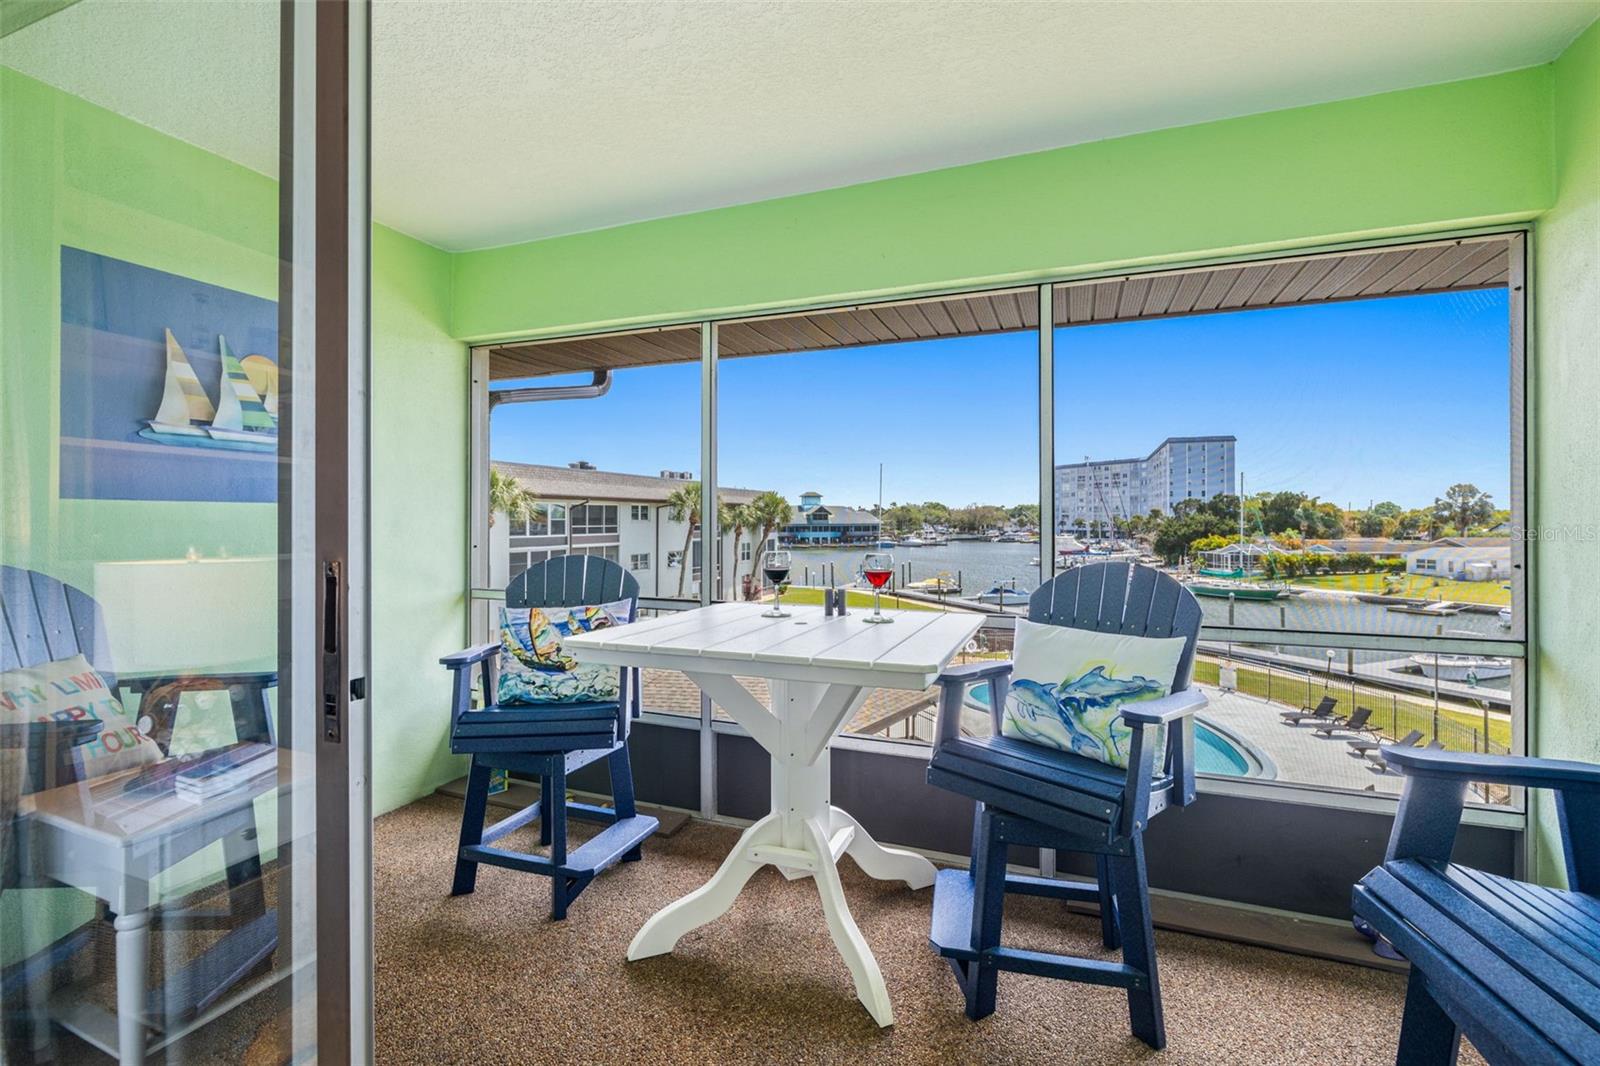 This is  the view dreams are made of!  Beautiful water and pool views! You can literally spend your entire day here watching the manatees and dolphins!